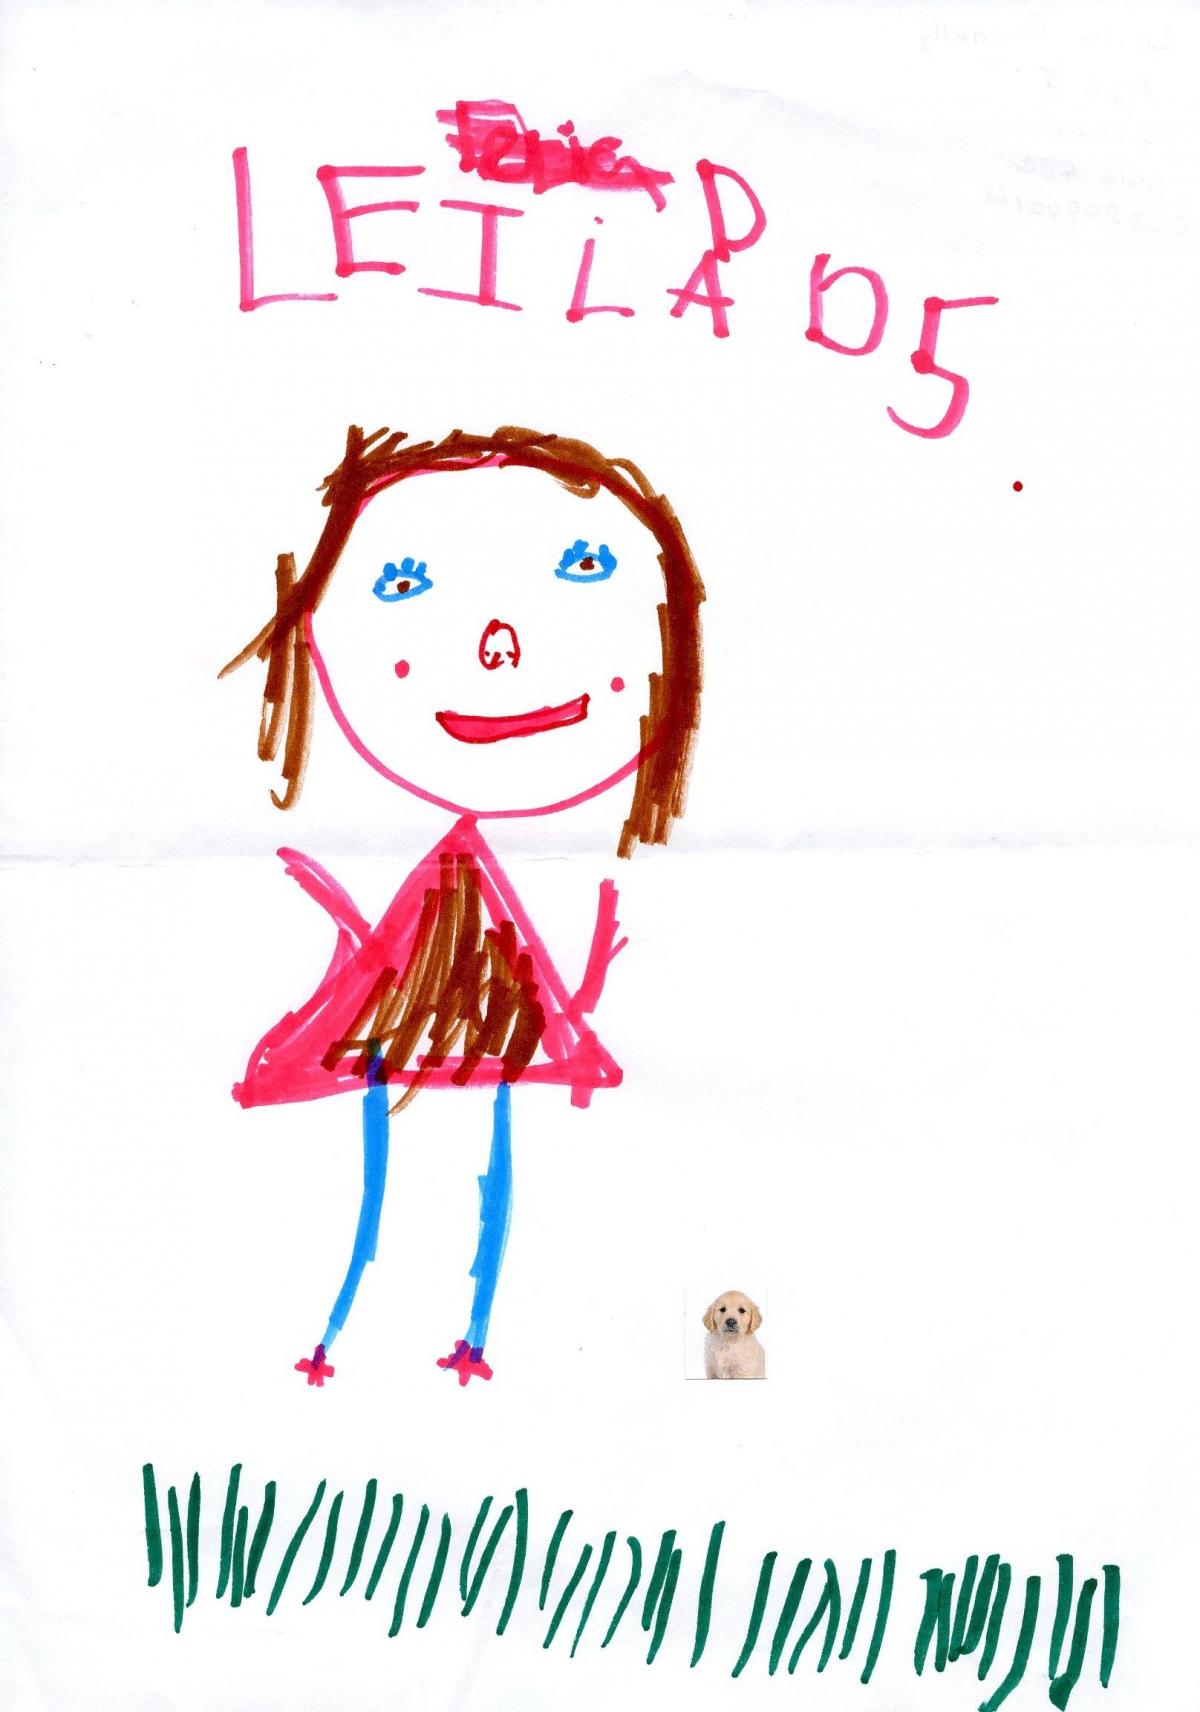 Five and under: By Leila Donnelly, five